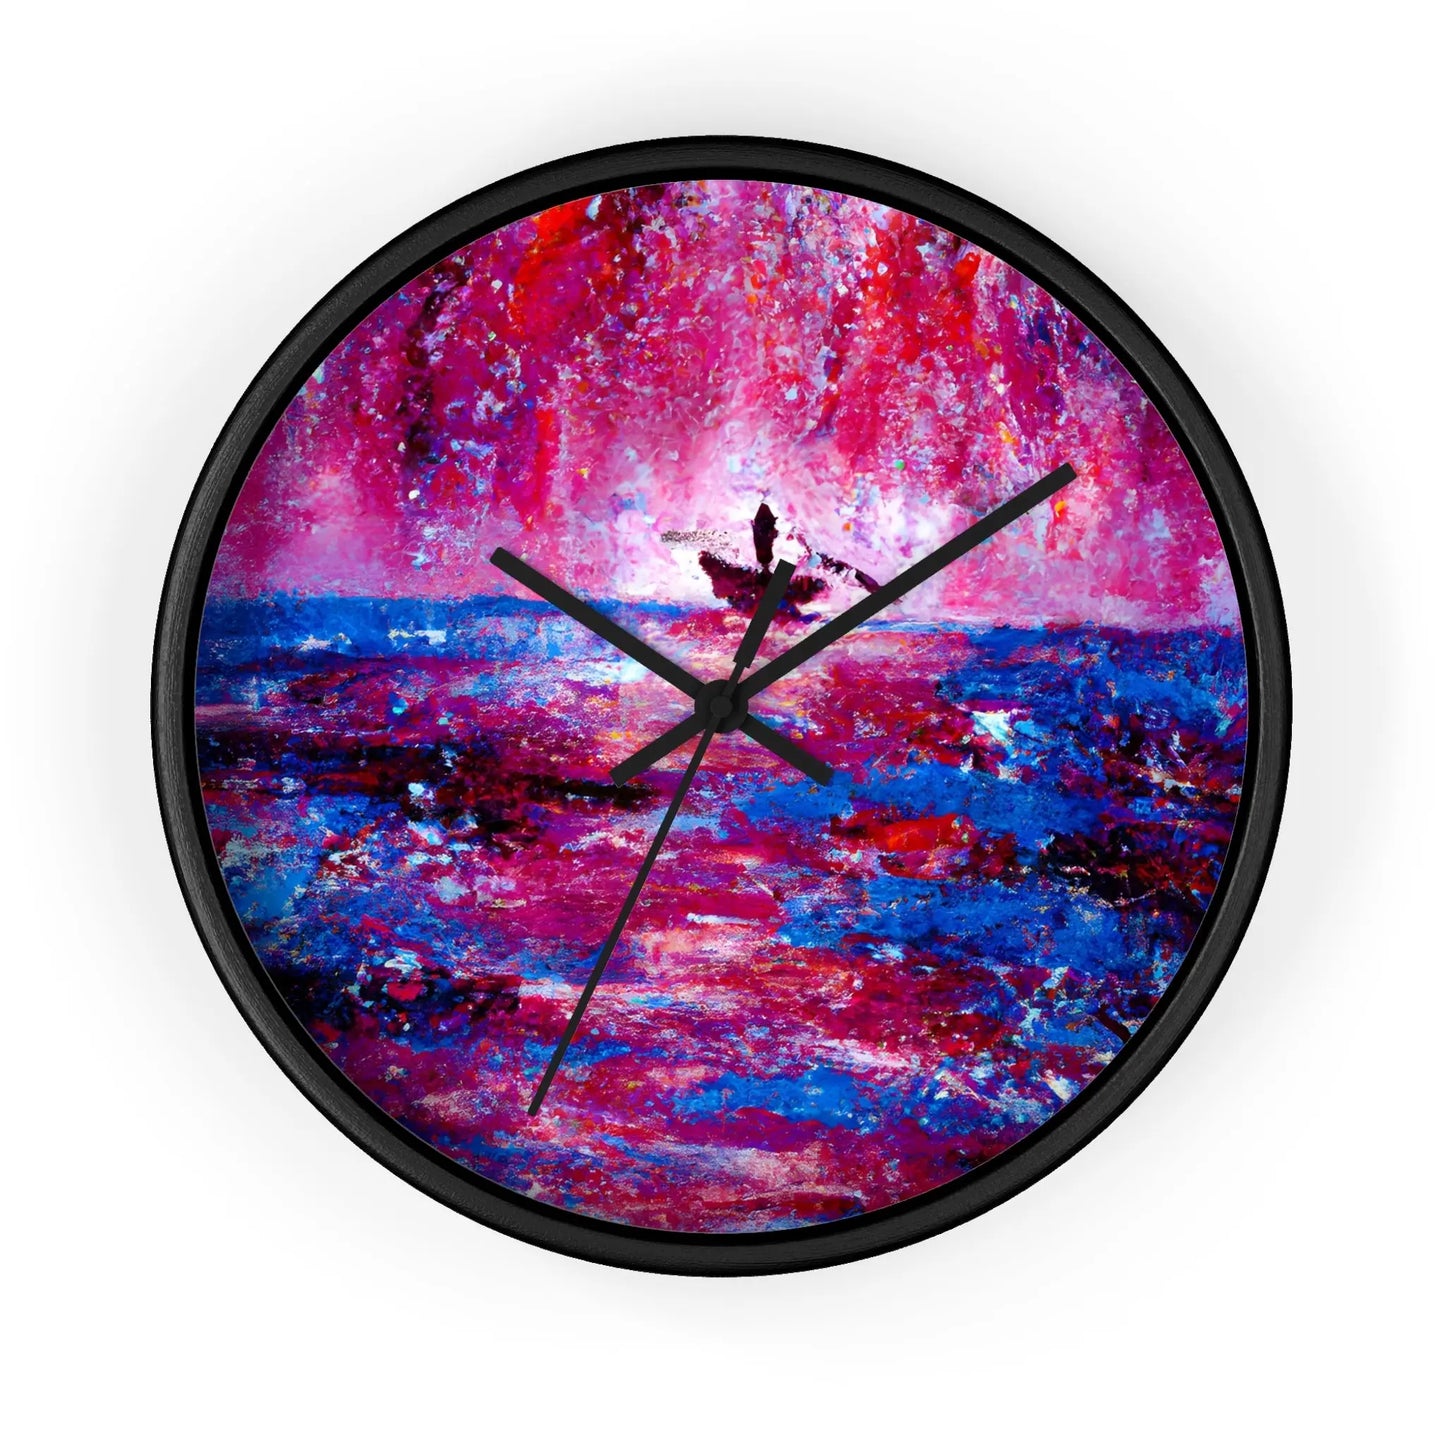 MarcelliArtist - Autism-Inspired Wall Clock